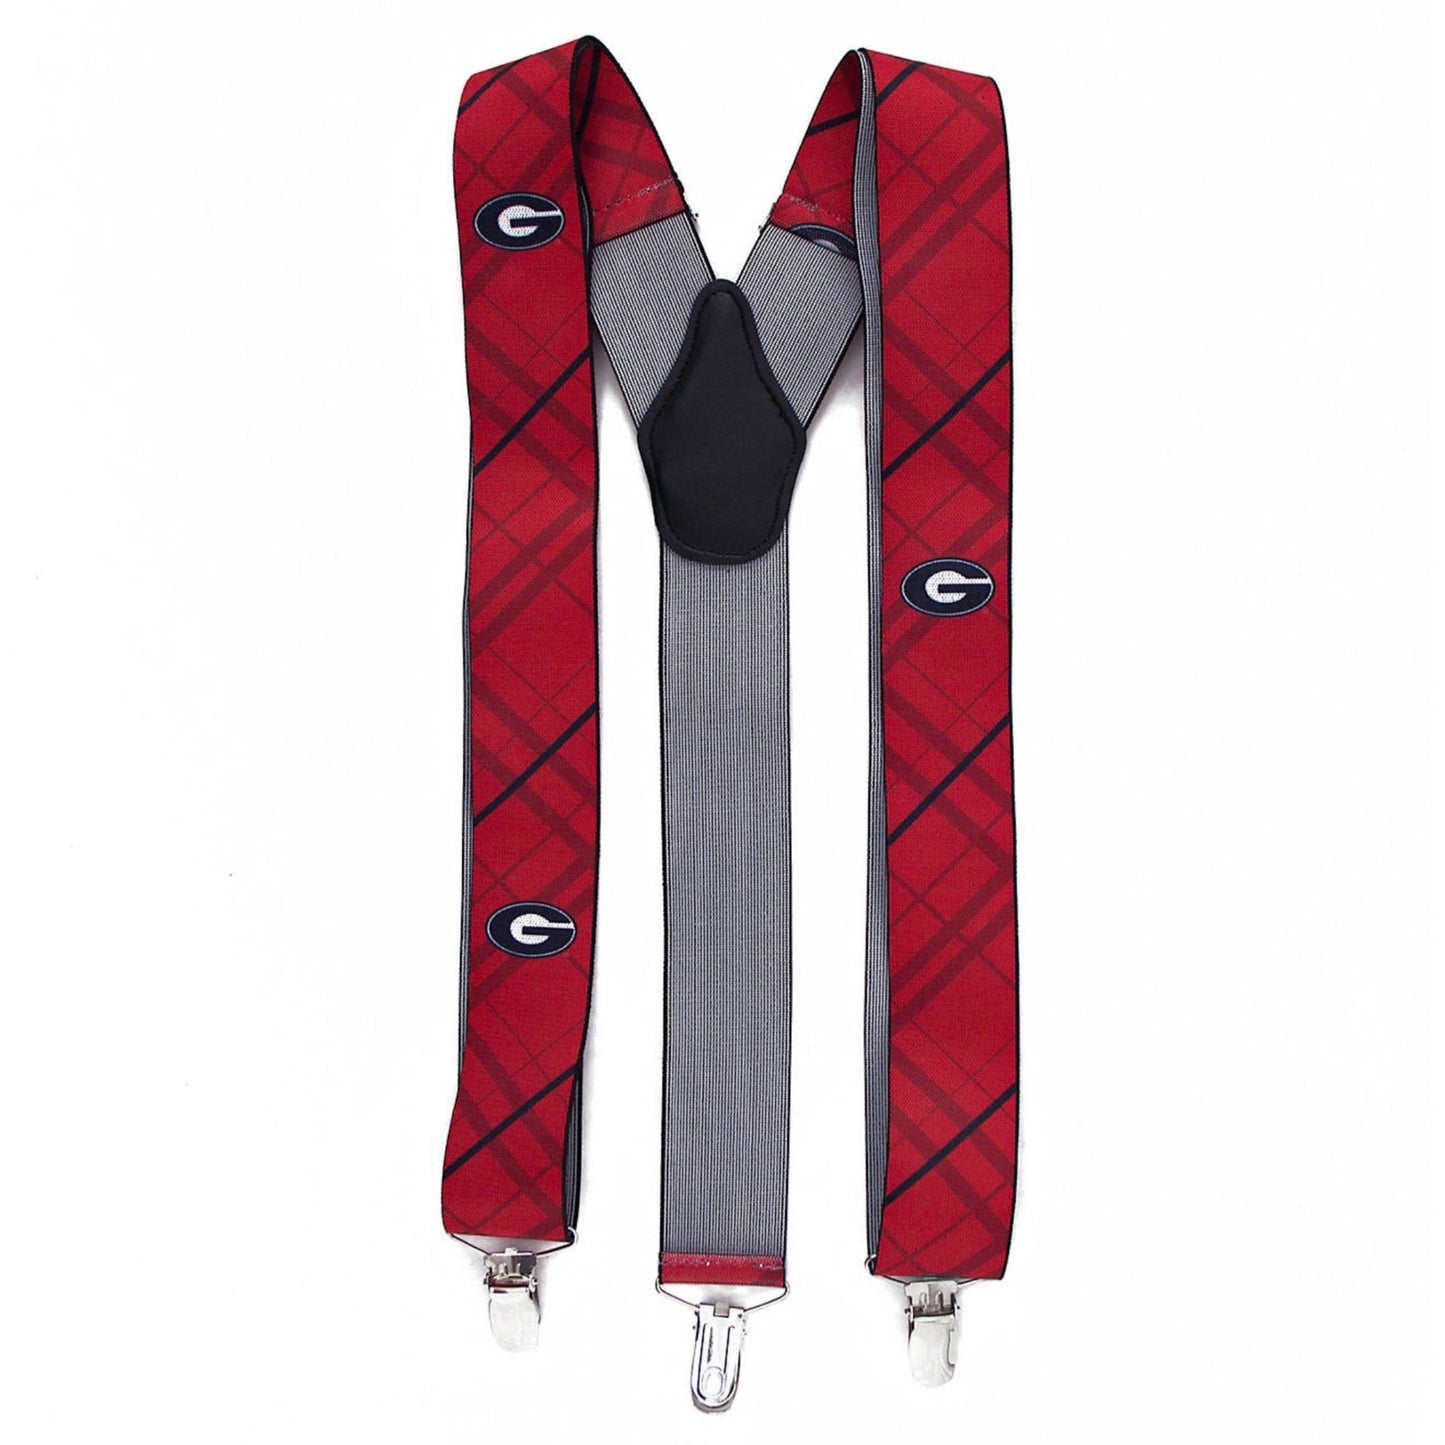 UGA Game Day Suspenders